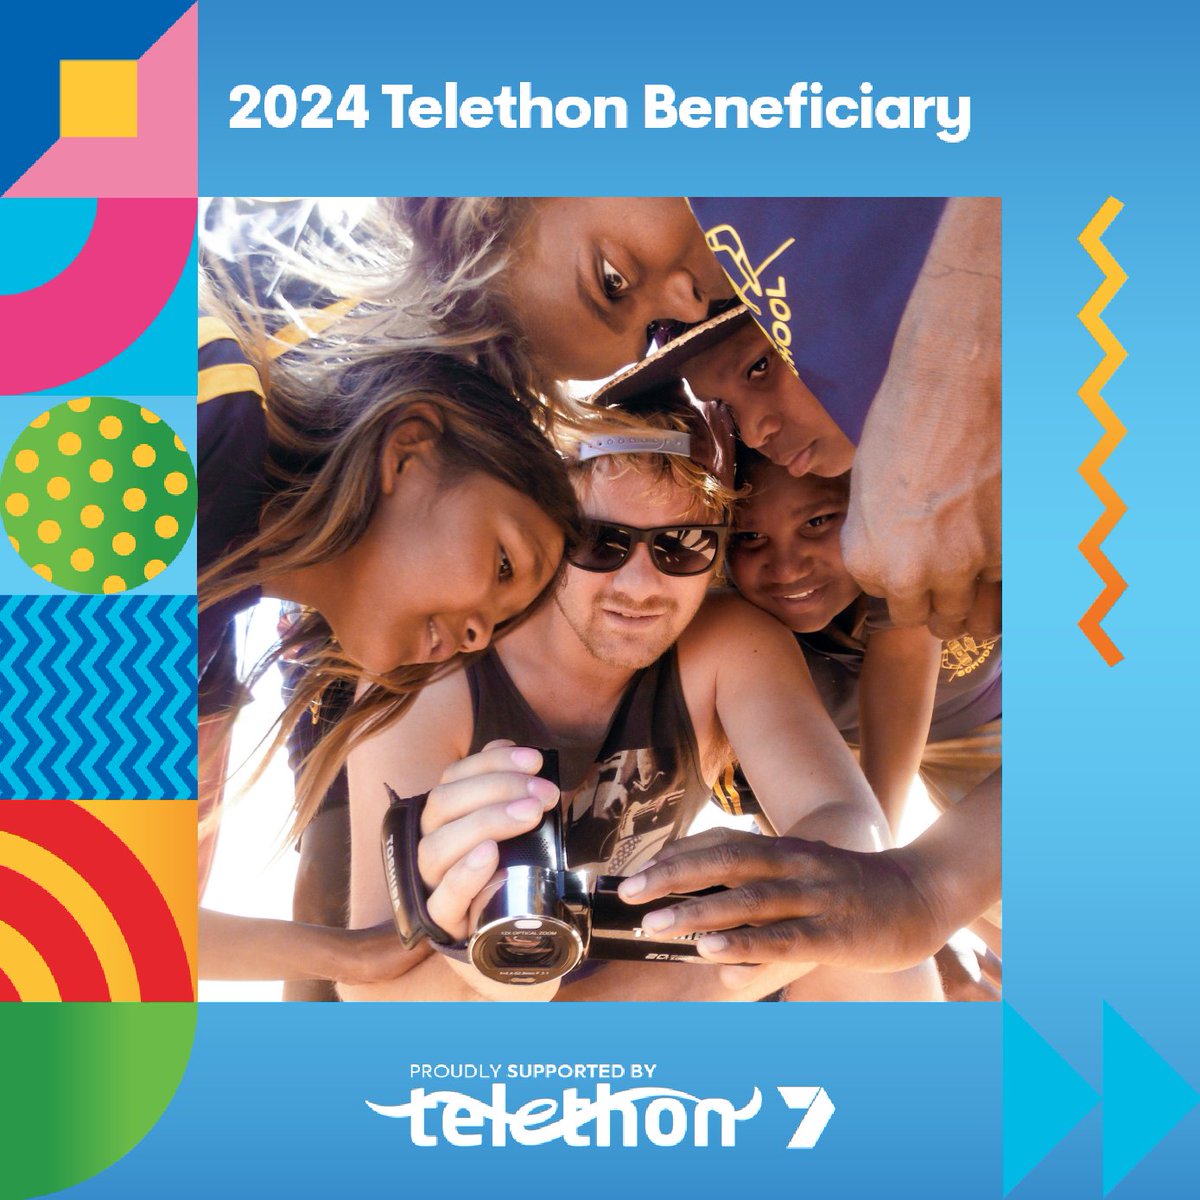 We're thrilled to be a @telethon7 Beneficiary in 2024! Constable Care Foundation will use this funding to deliver a one-week Youth Choices remote filmmaking intensive to participants at Jigalong Community School. Learn more ➡ bit.ly/49I5XbD

#Telethon7 #Telethon2024